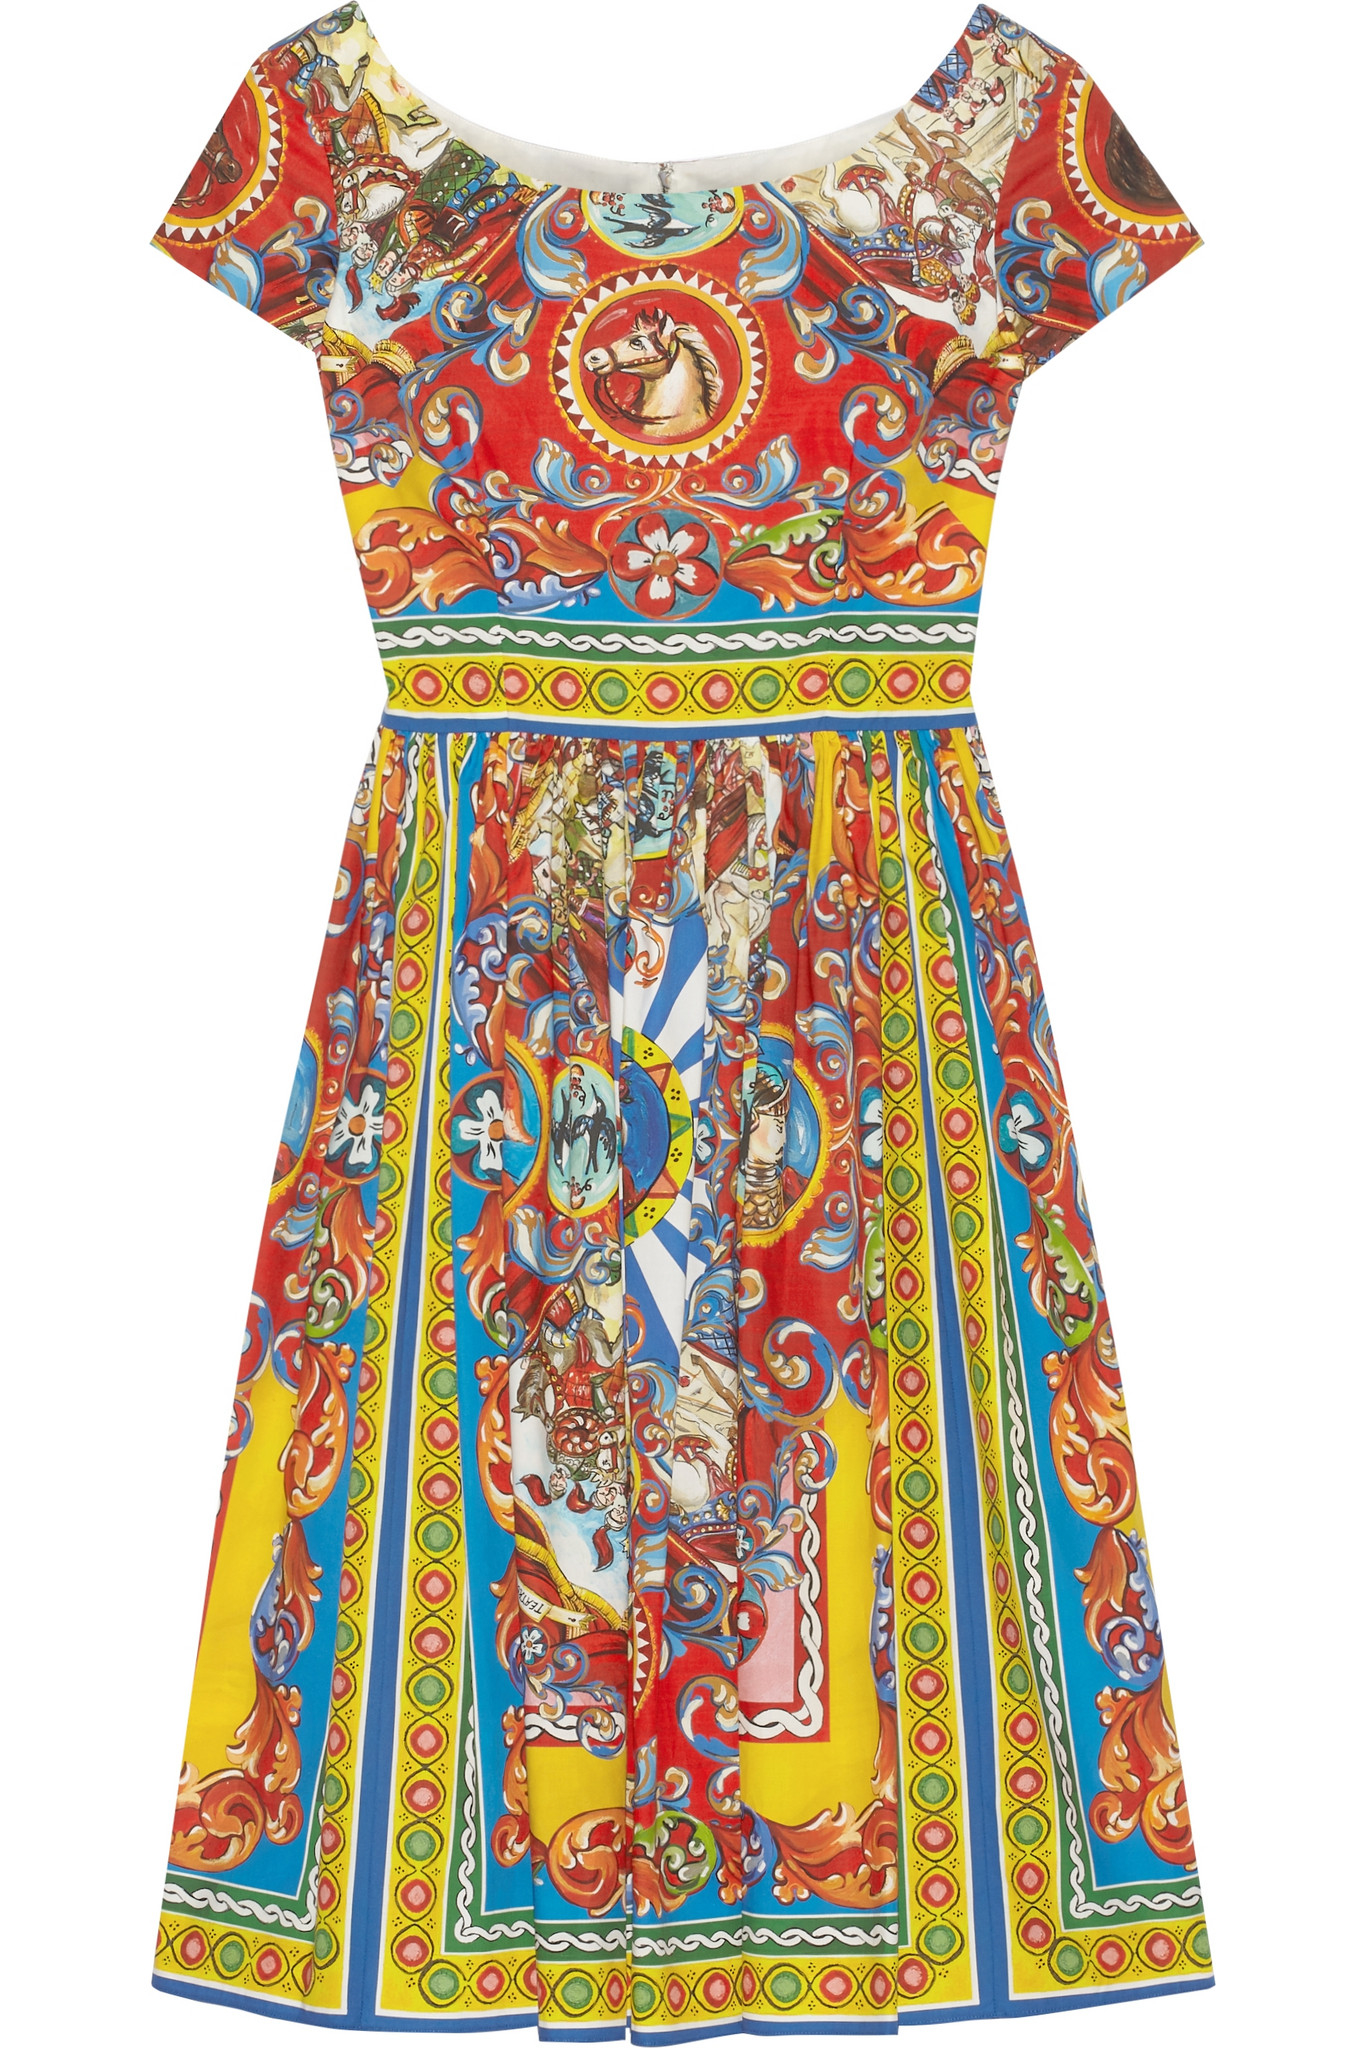 dolce and gabbana inspired dress